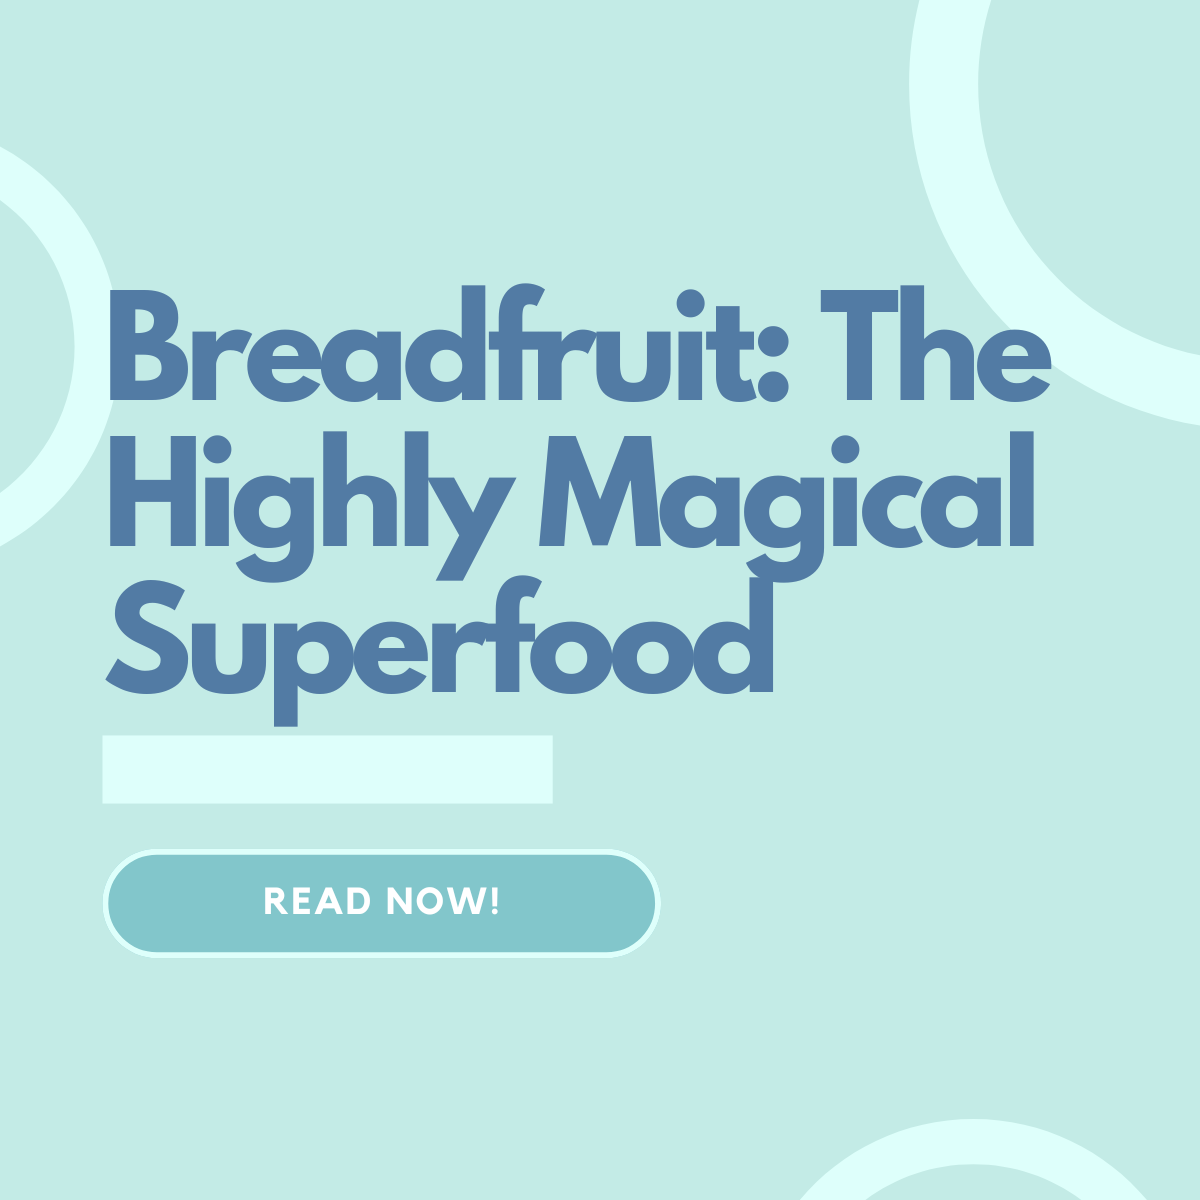 Breadfruit: The Highly Magical Superfood